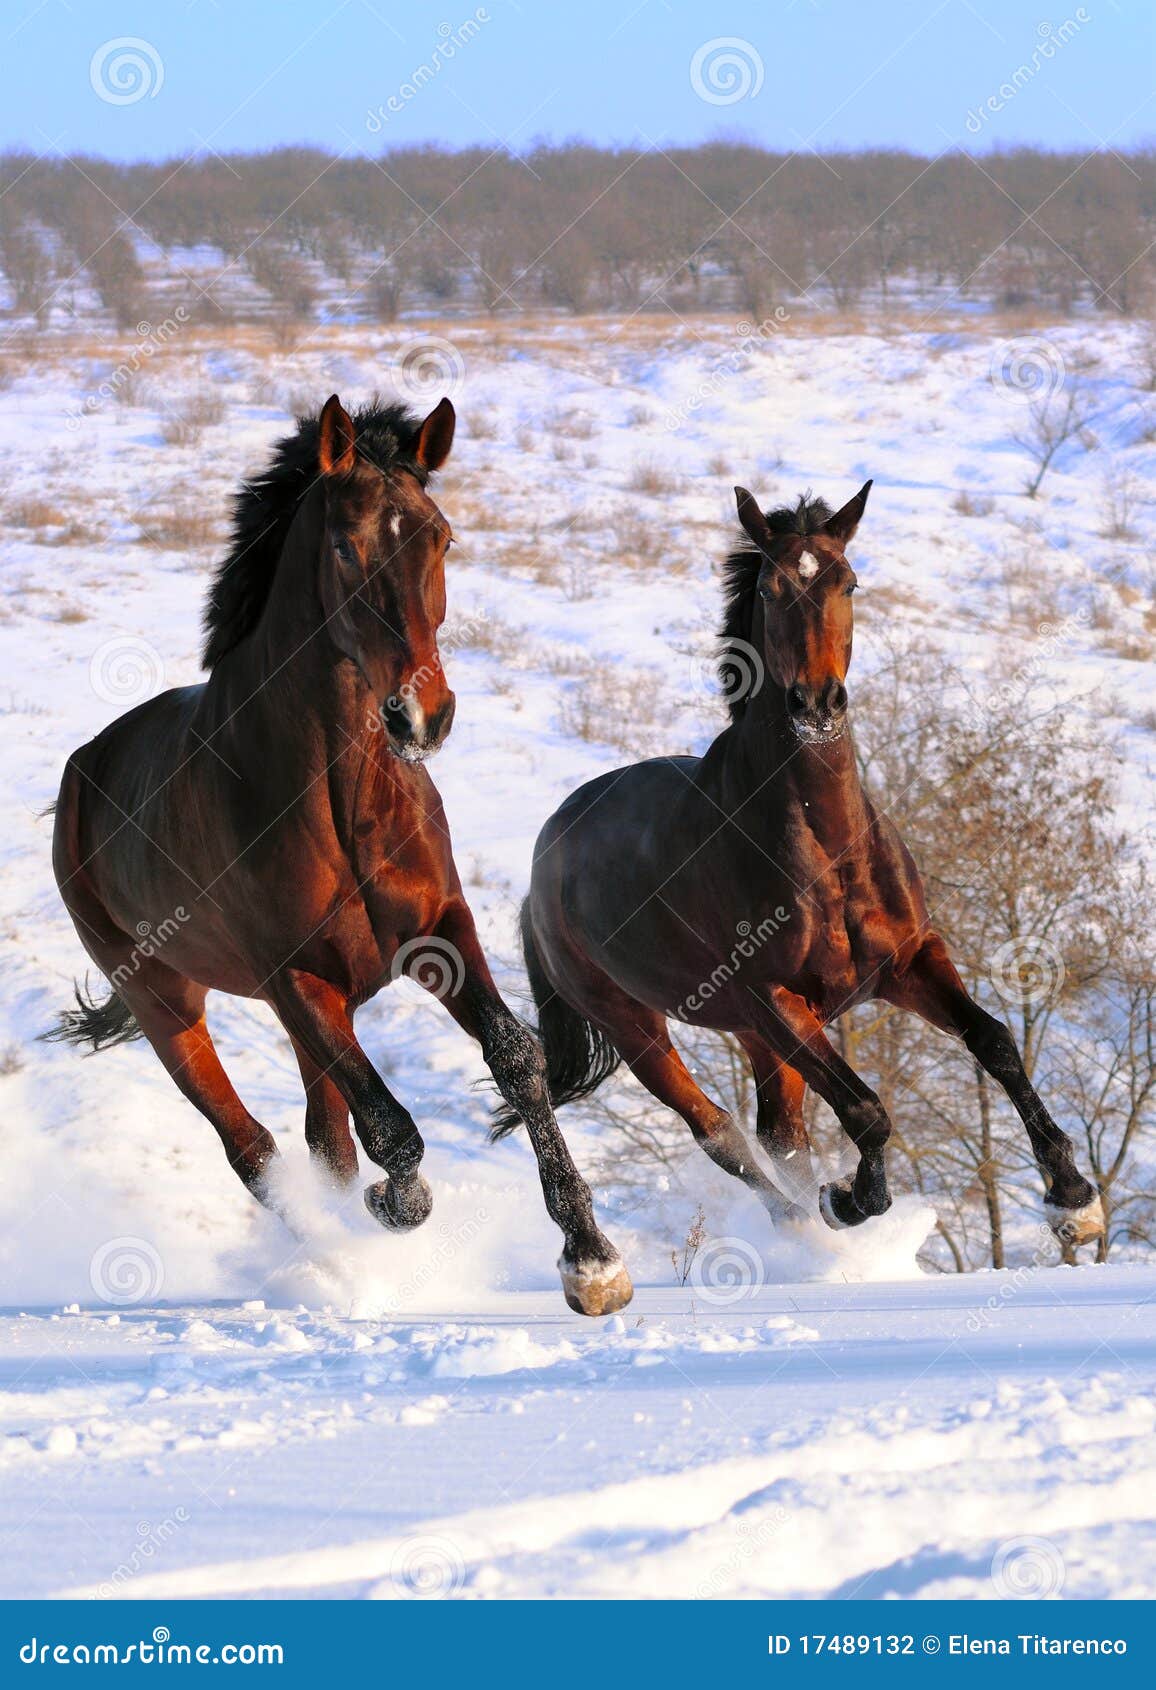 two horses galloping in field